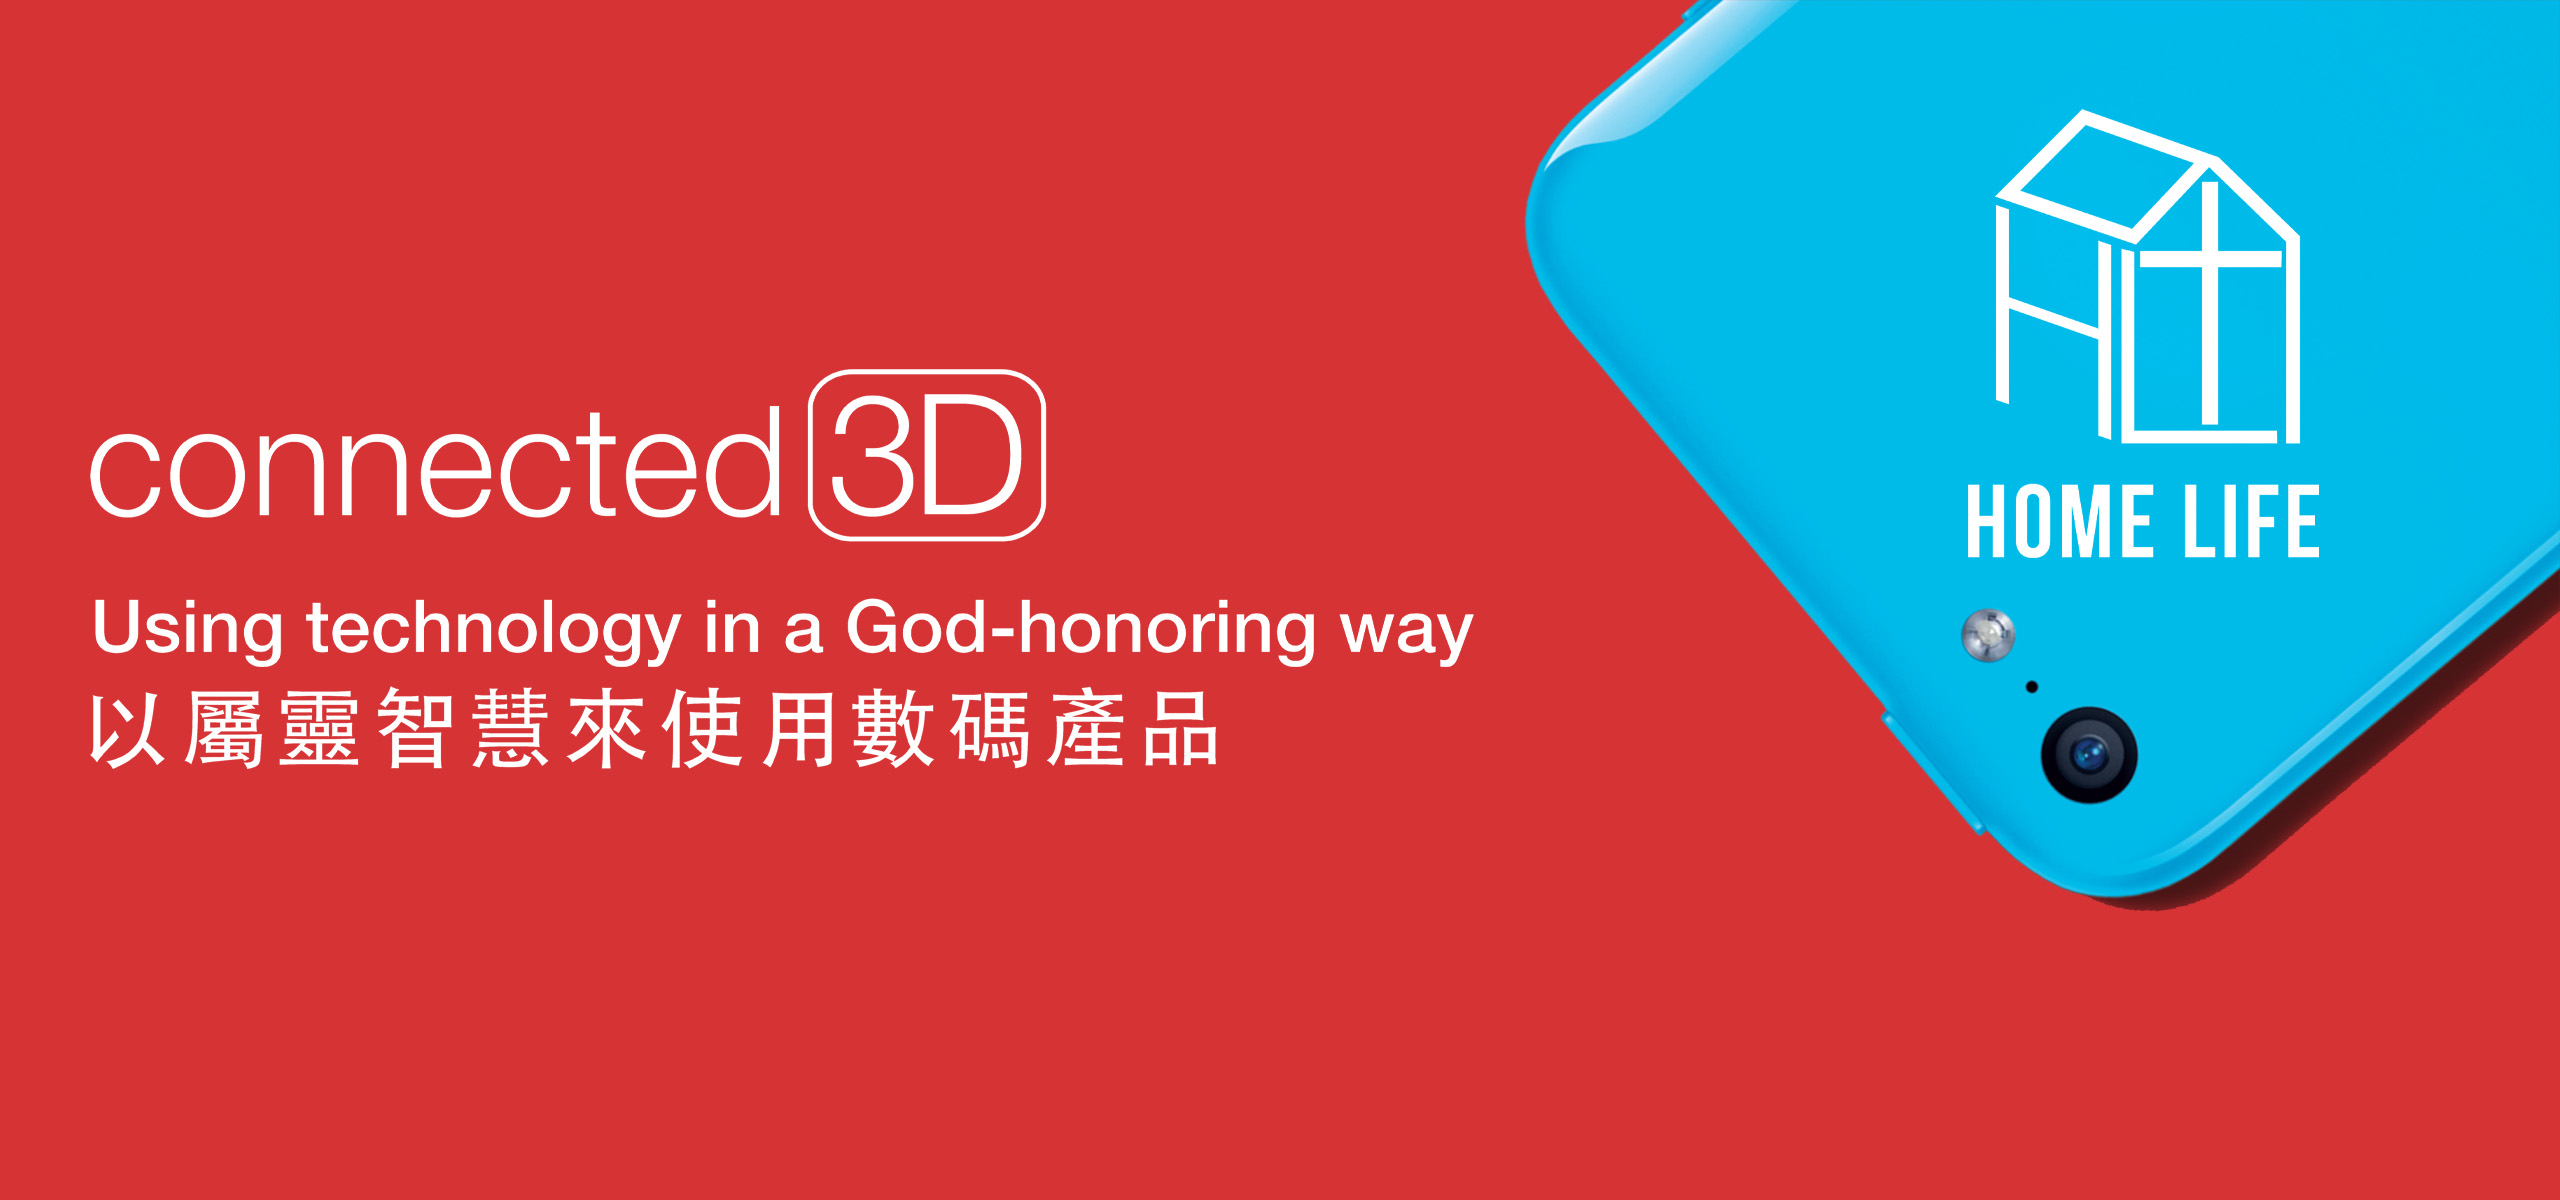 connected3d banner